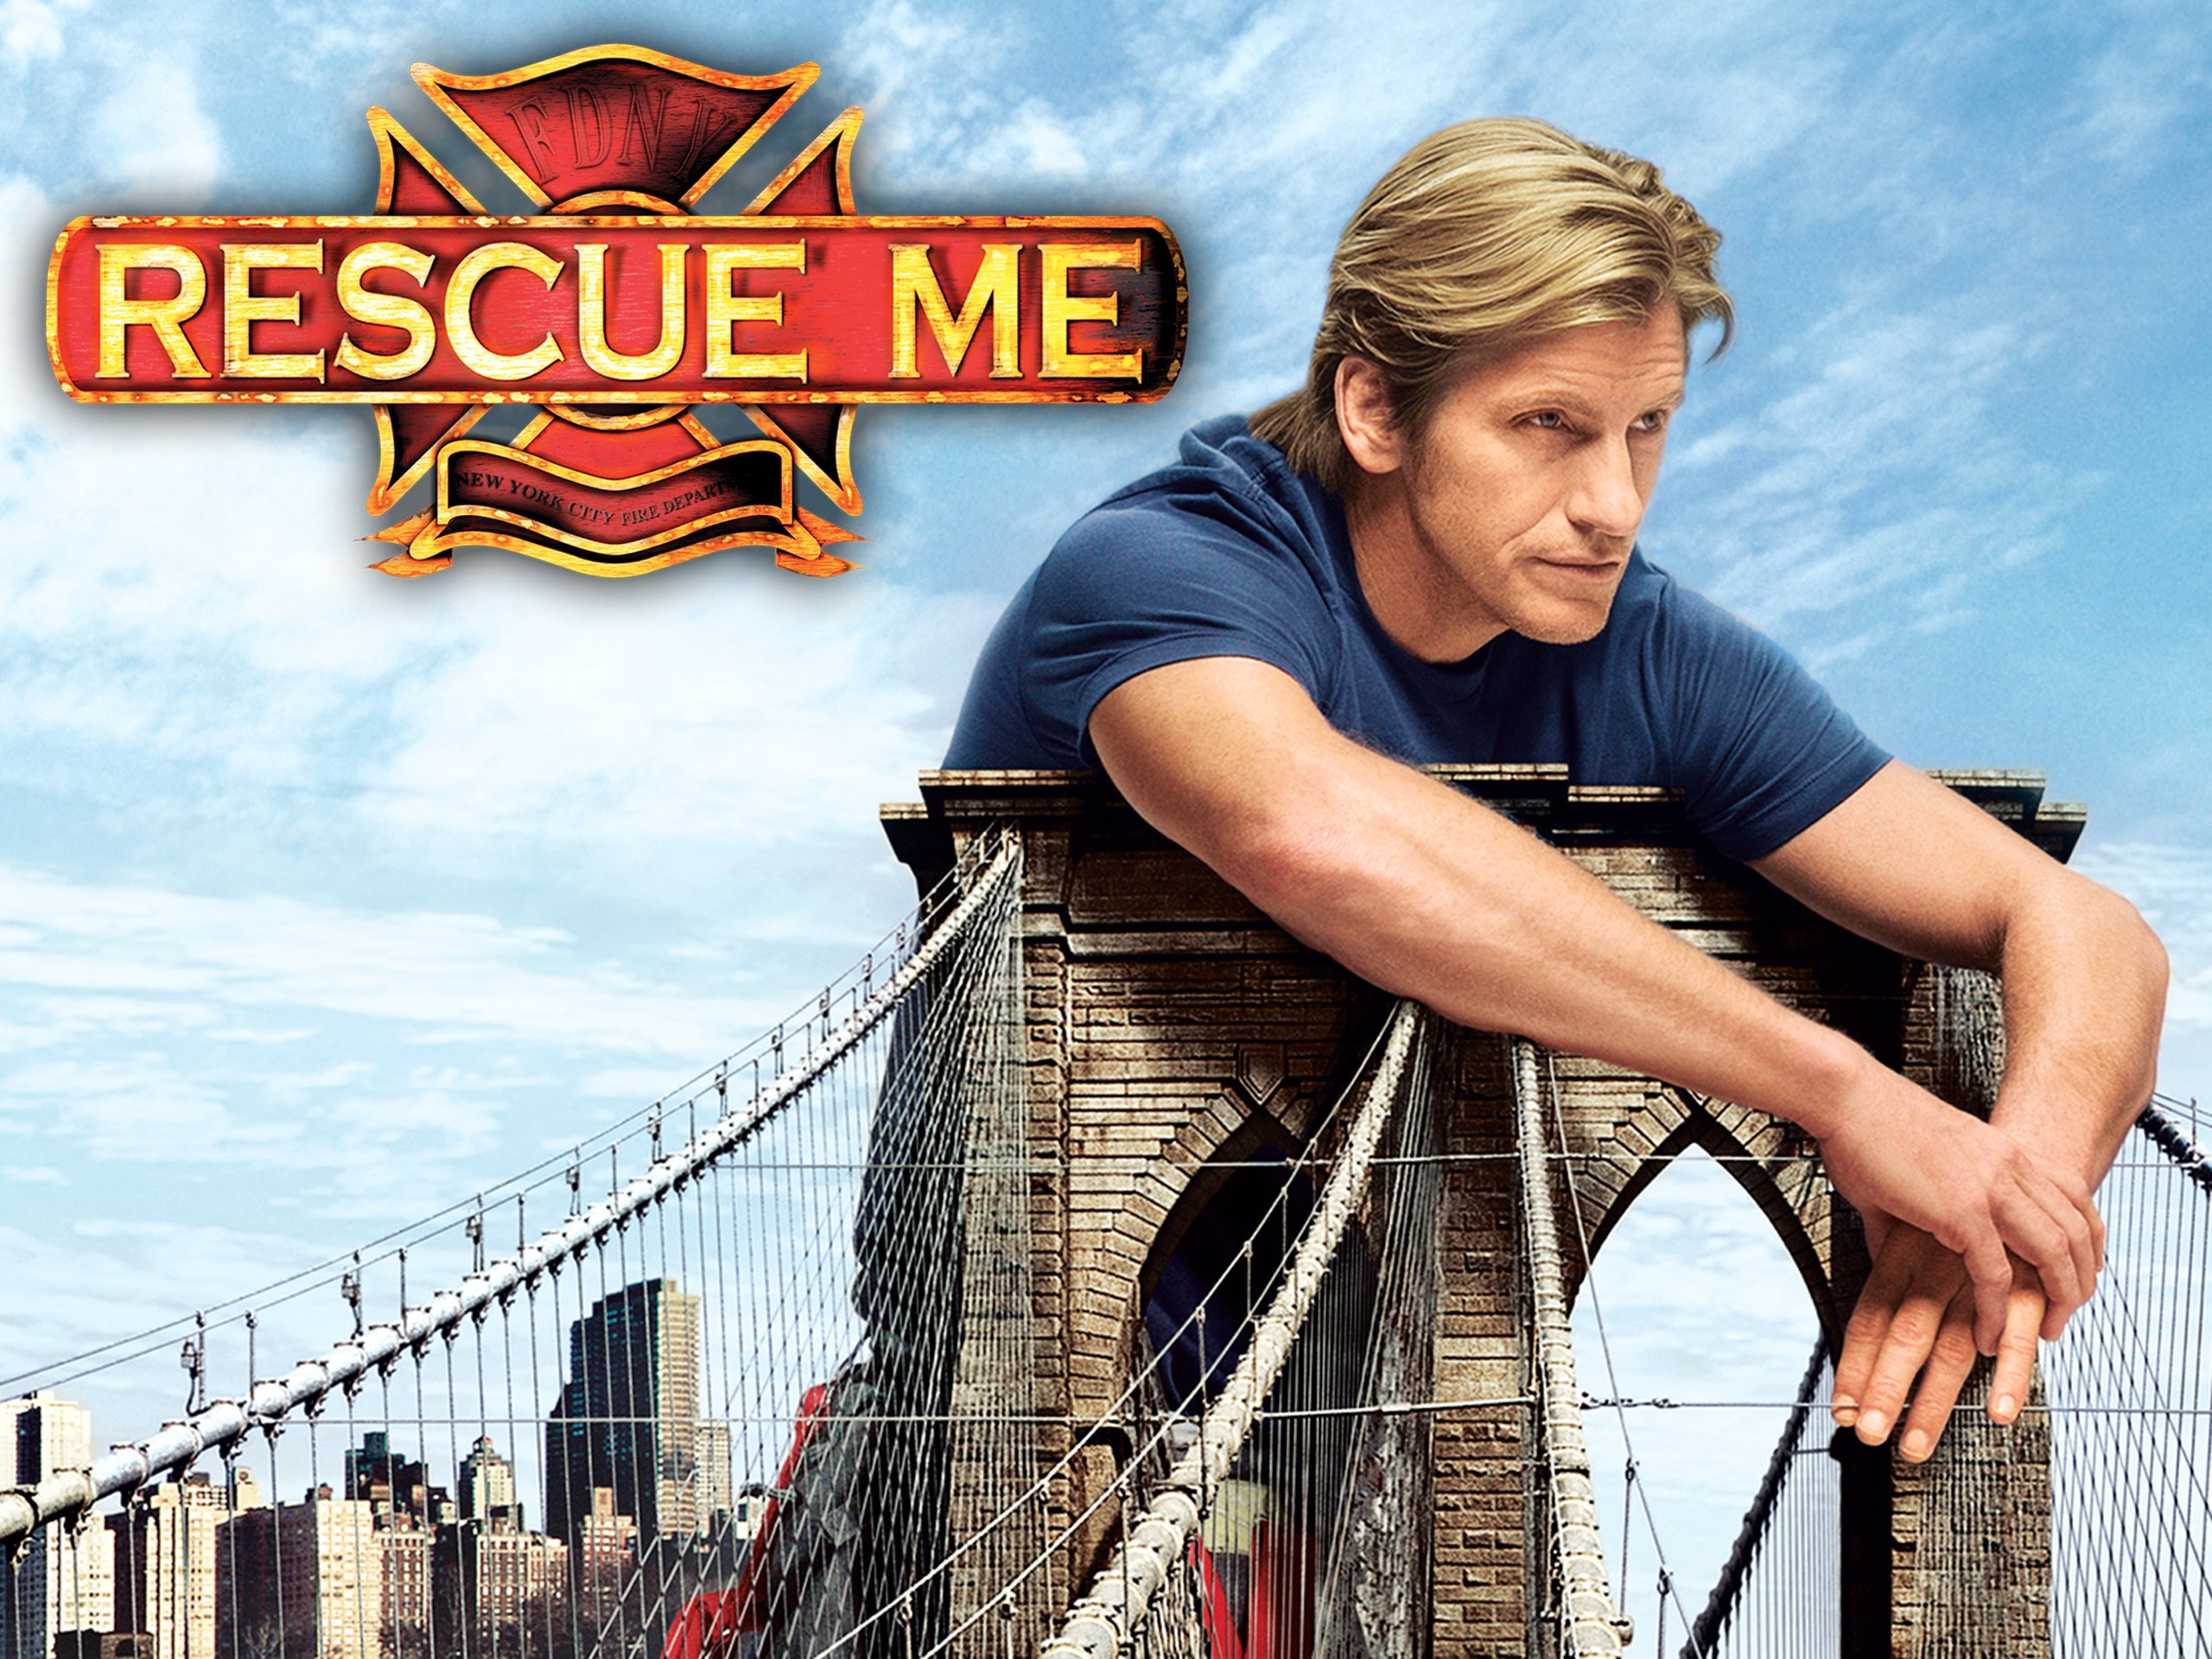 Rescue Me - About the Show